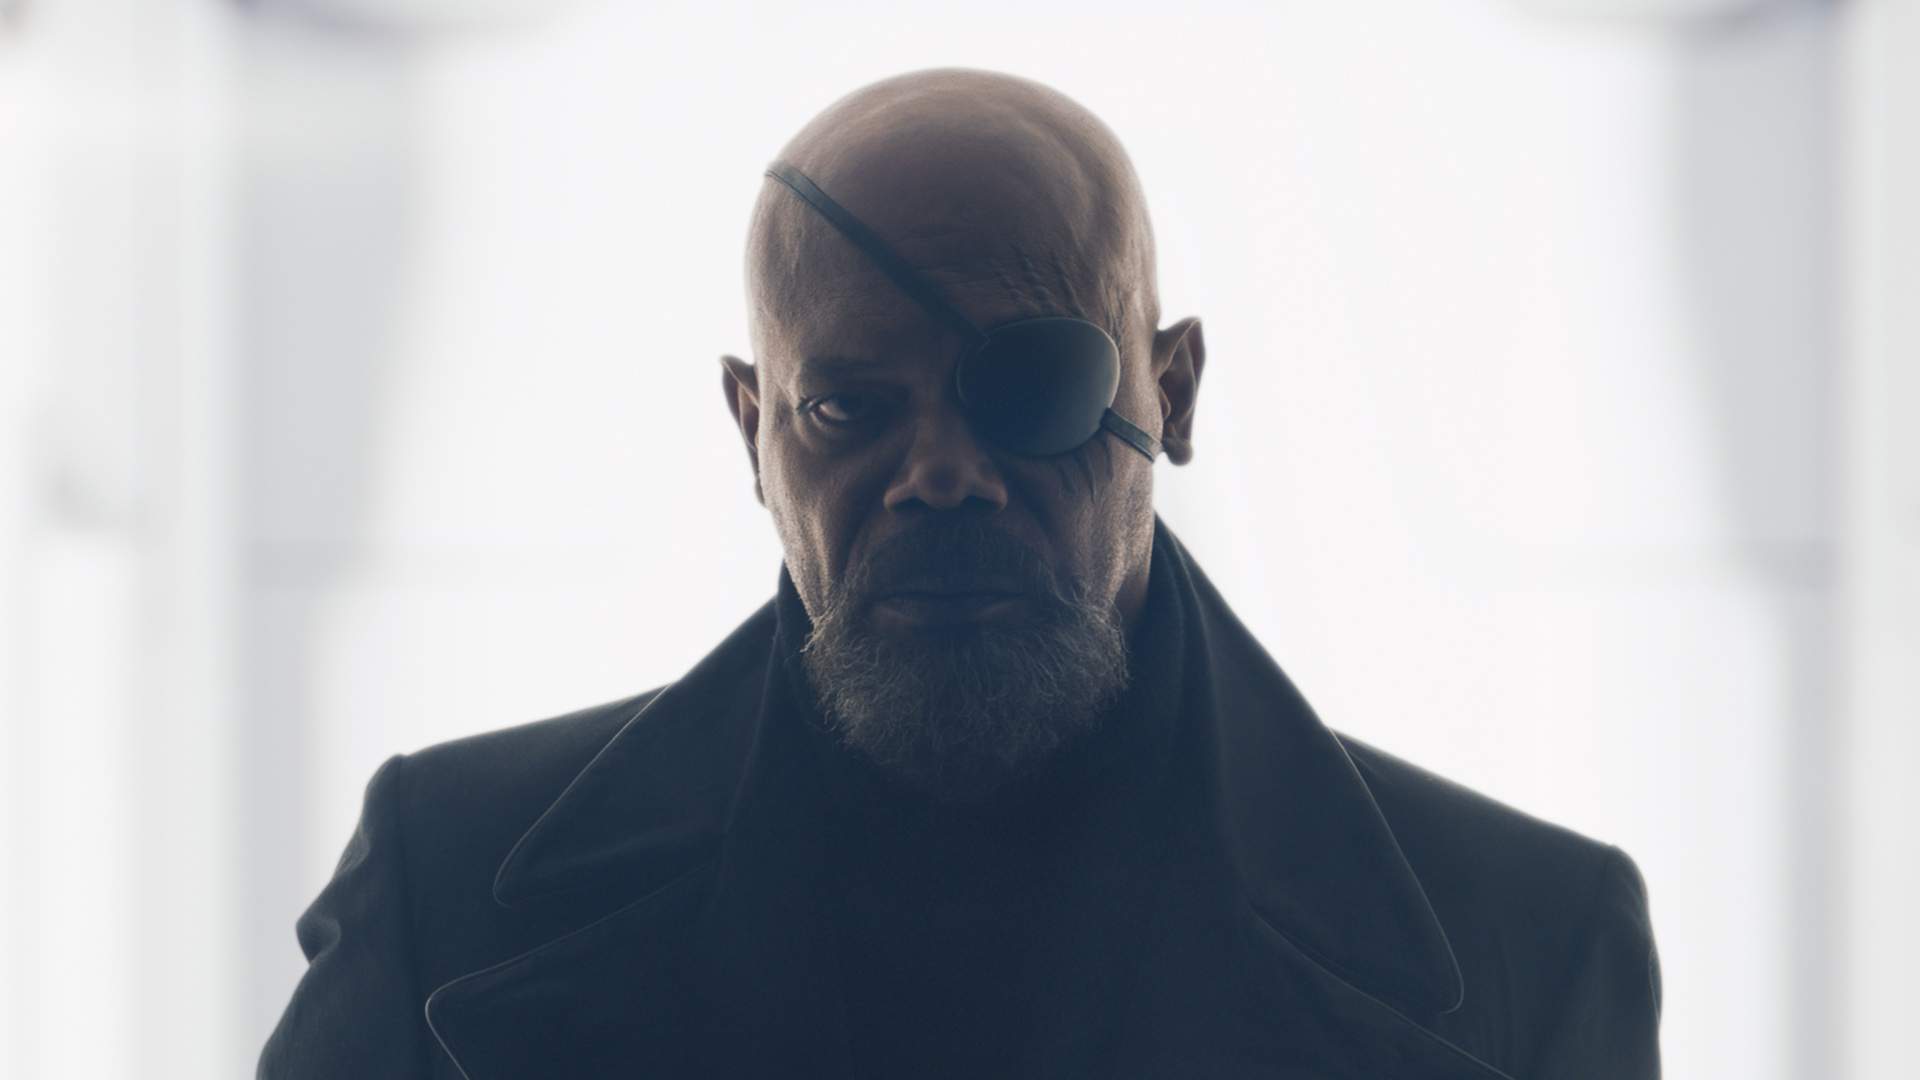 Nick Fury Prepares for War in the First Trailer for Marvel's New Disney+ Series 'Secret Invasion'